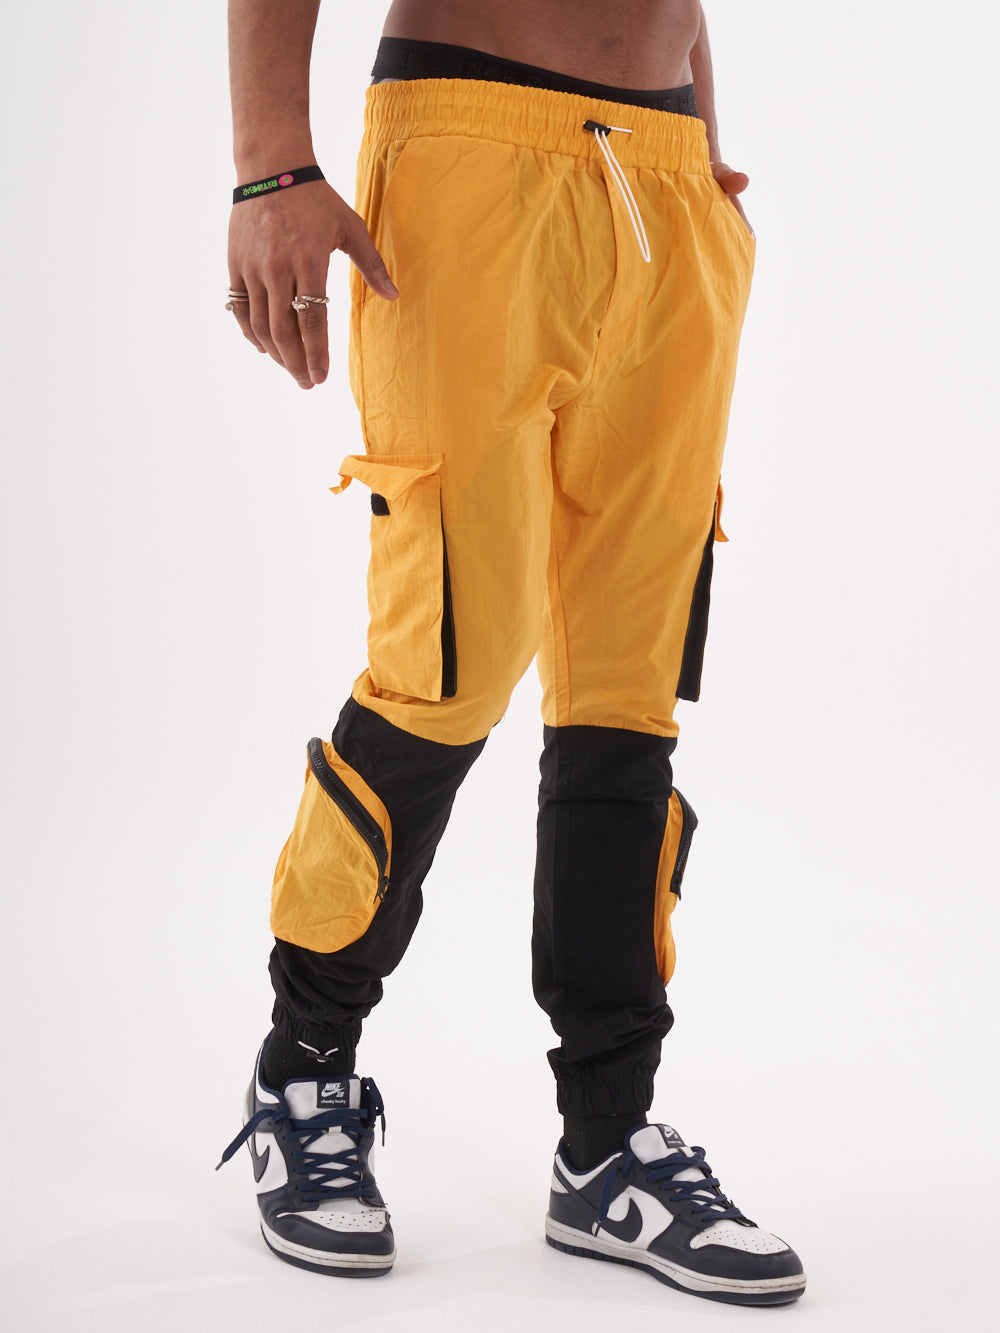 A man wearing Renegade | Yellow cargo pants and black sneakers.